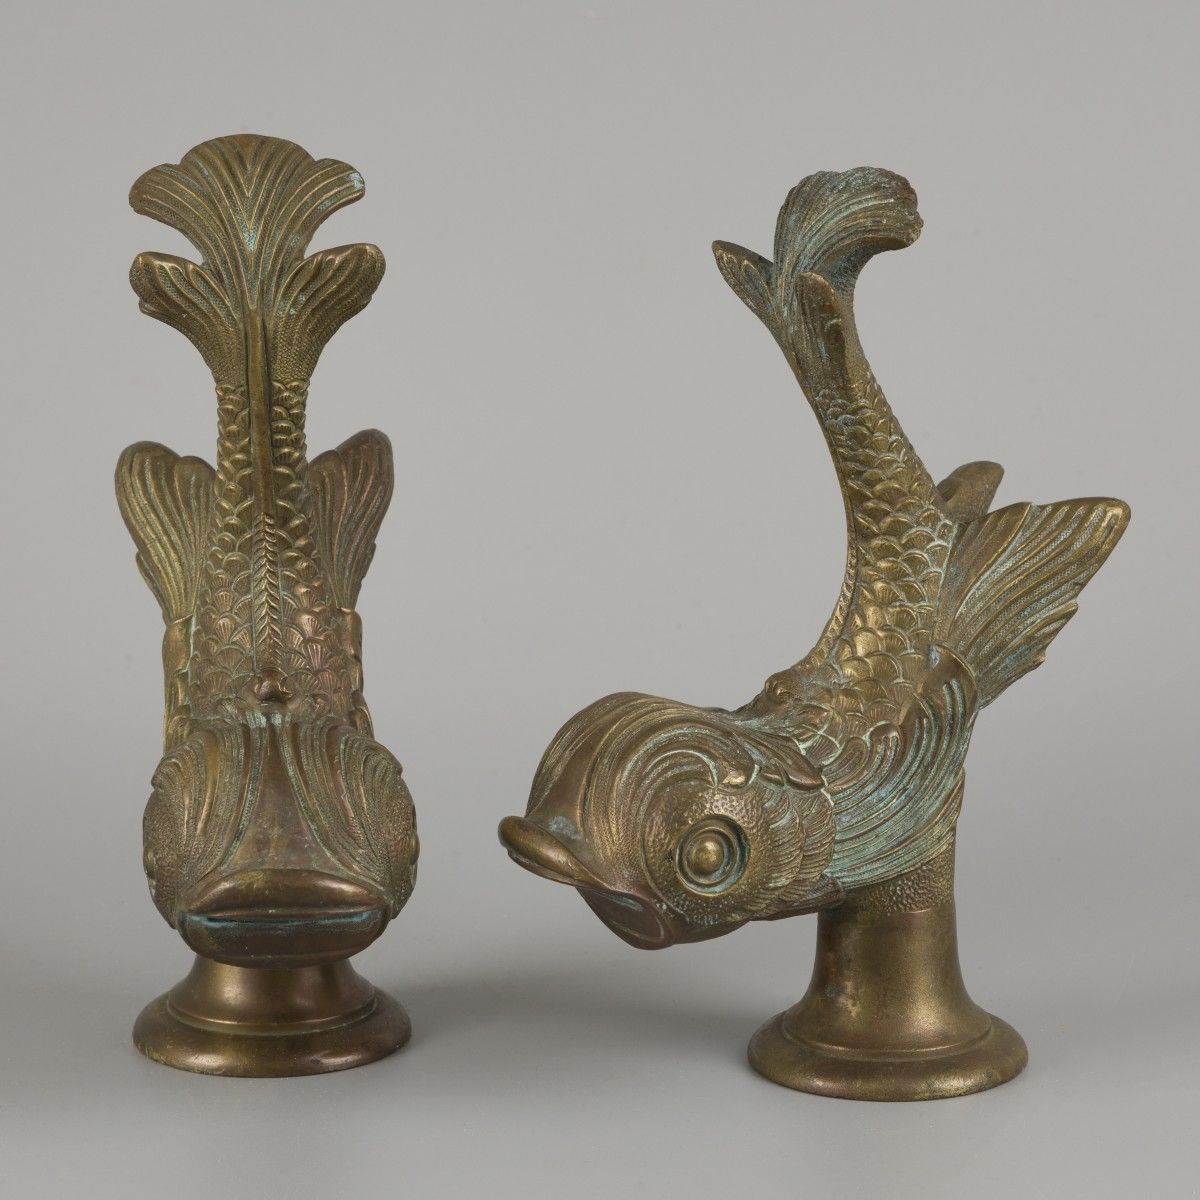 A set of (2) bronze water faucets in the shape of fish, France, ca. 1900. 嘴里有开口，&hellip;